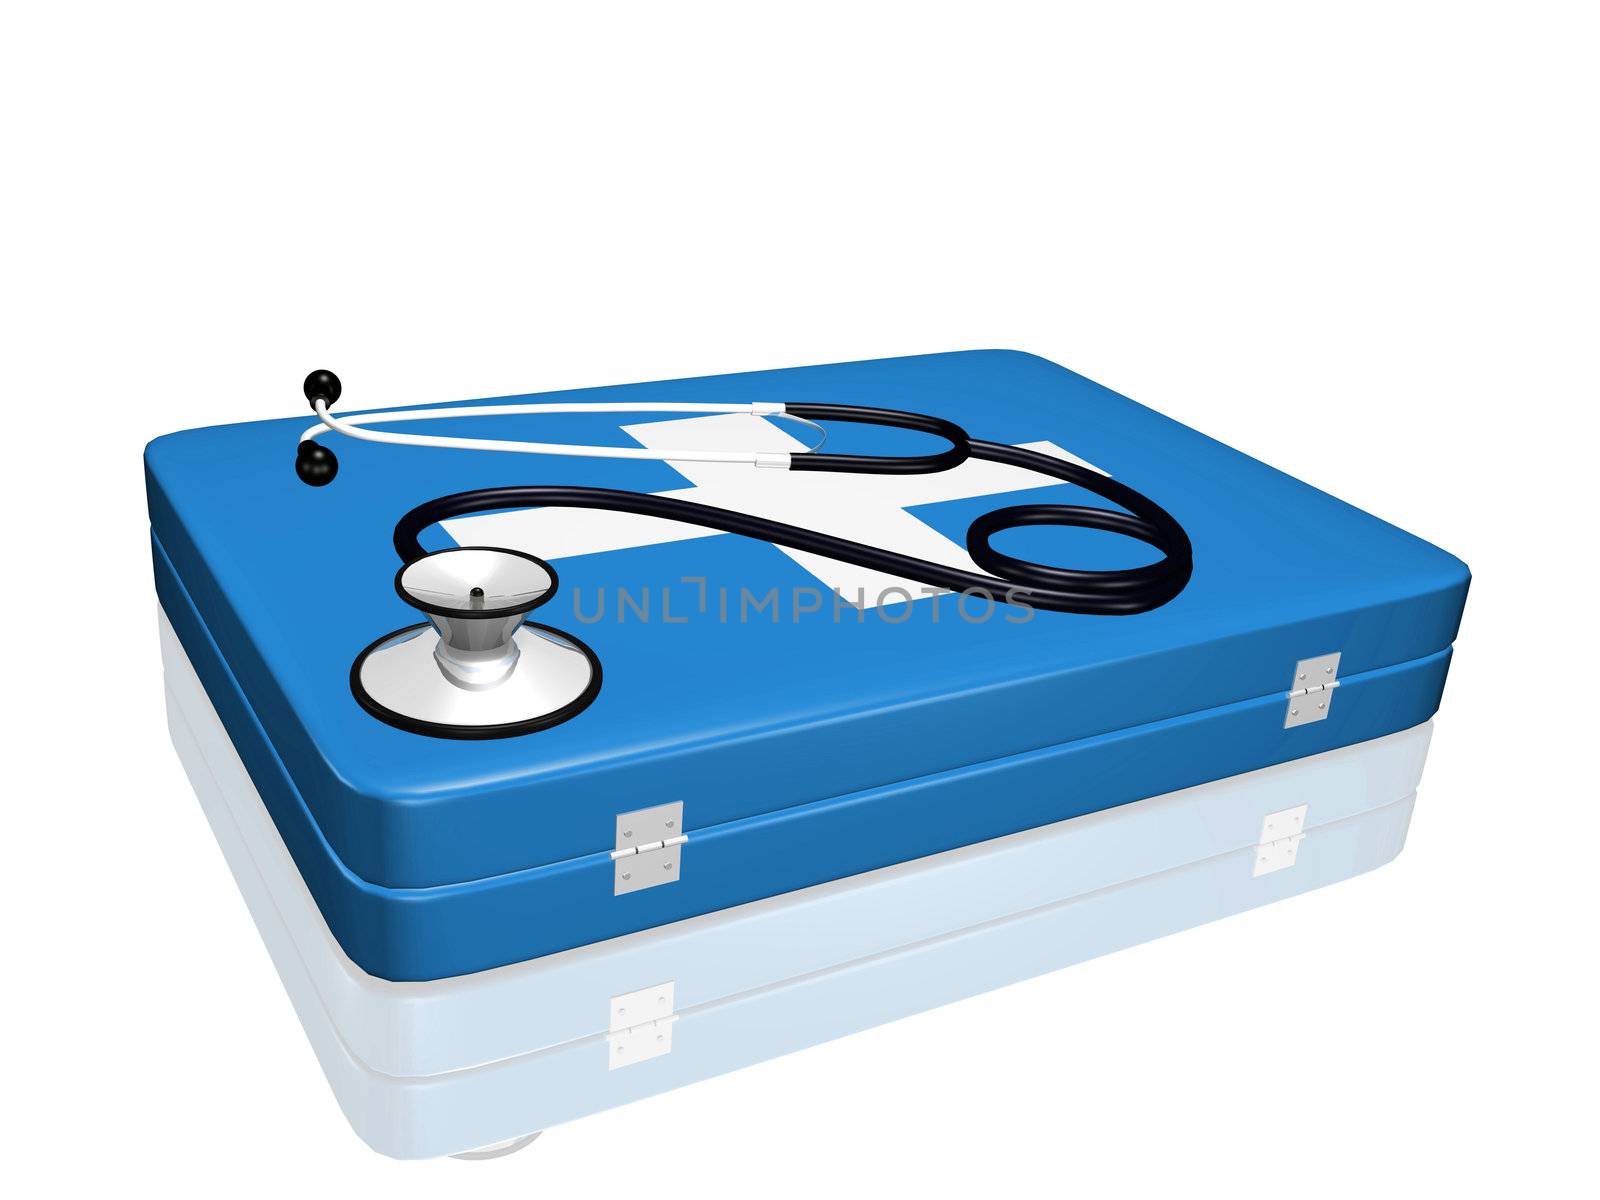 A 3D stethoscope on top of a medical kit.